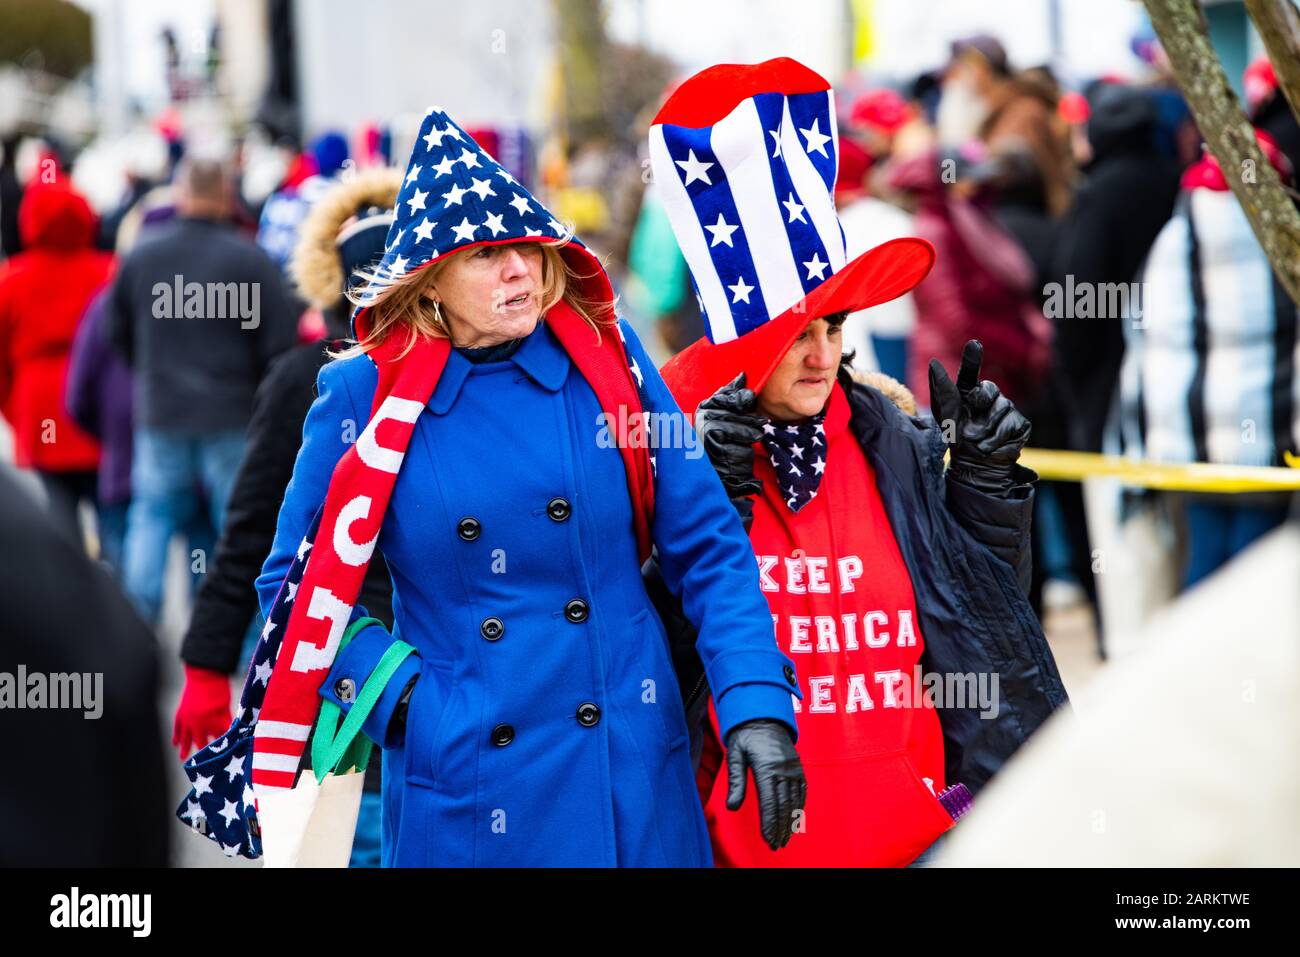 Wildwood, New Jersey, USA. 28th Jan 2020. Thousands lined up for hours before an evening rally paid for by President Donald Trump at the Wildwood Convention Center in New Jersey. January 28, 2020. Credit: Chris Baker Evens / Alamy Live News. Stock Photo